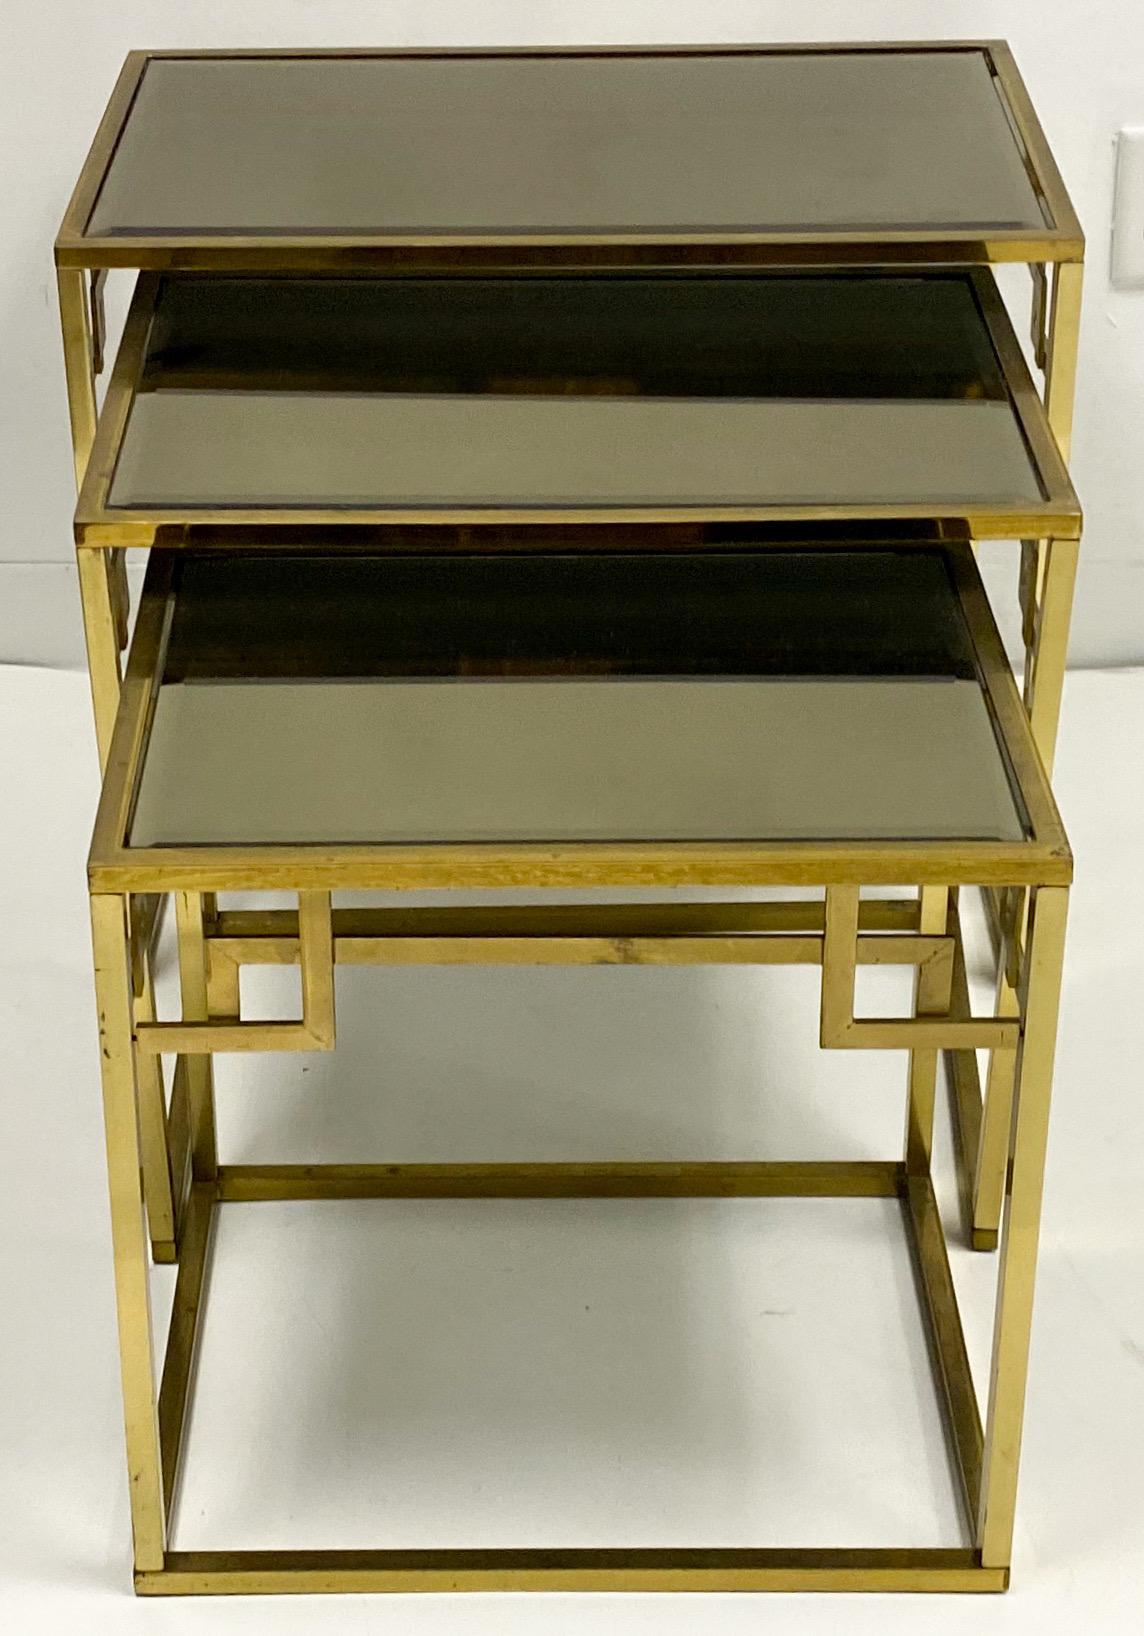 This is a set of Italian neoclassical style solid brass Greek key nesting tables. The tops are mirrored. They date to the 1970s and are in very good condition.